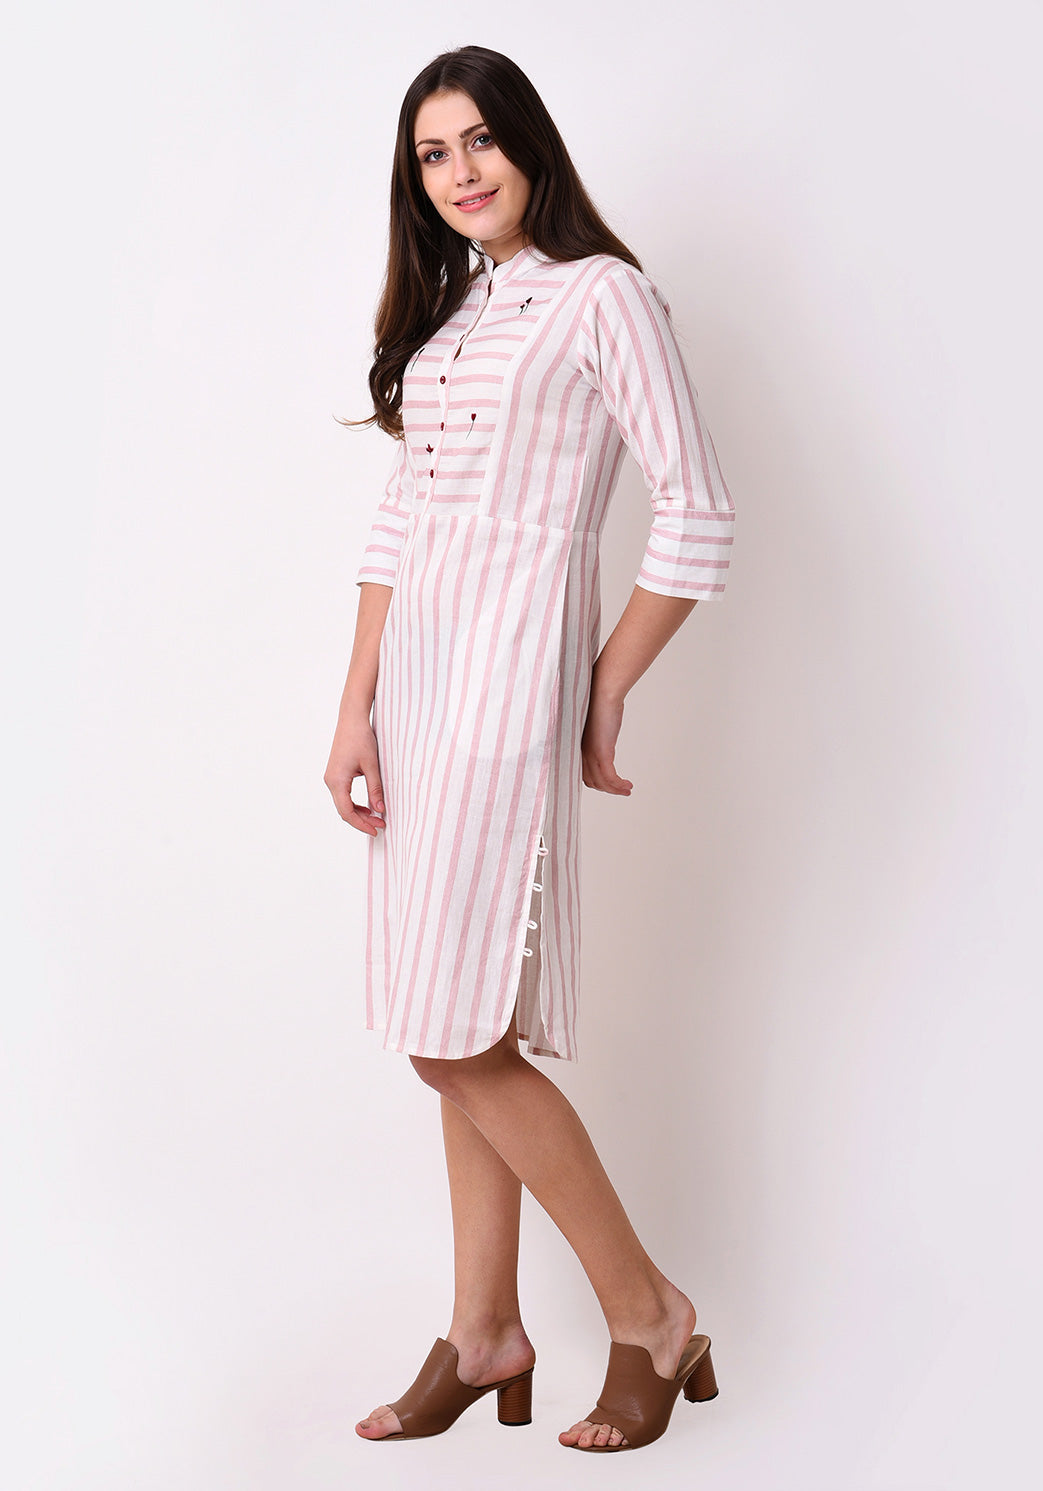 Button Down Embroidered Dress - Blush Pink